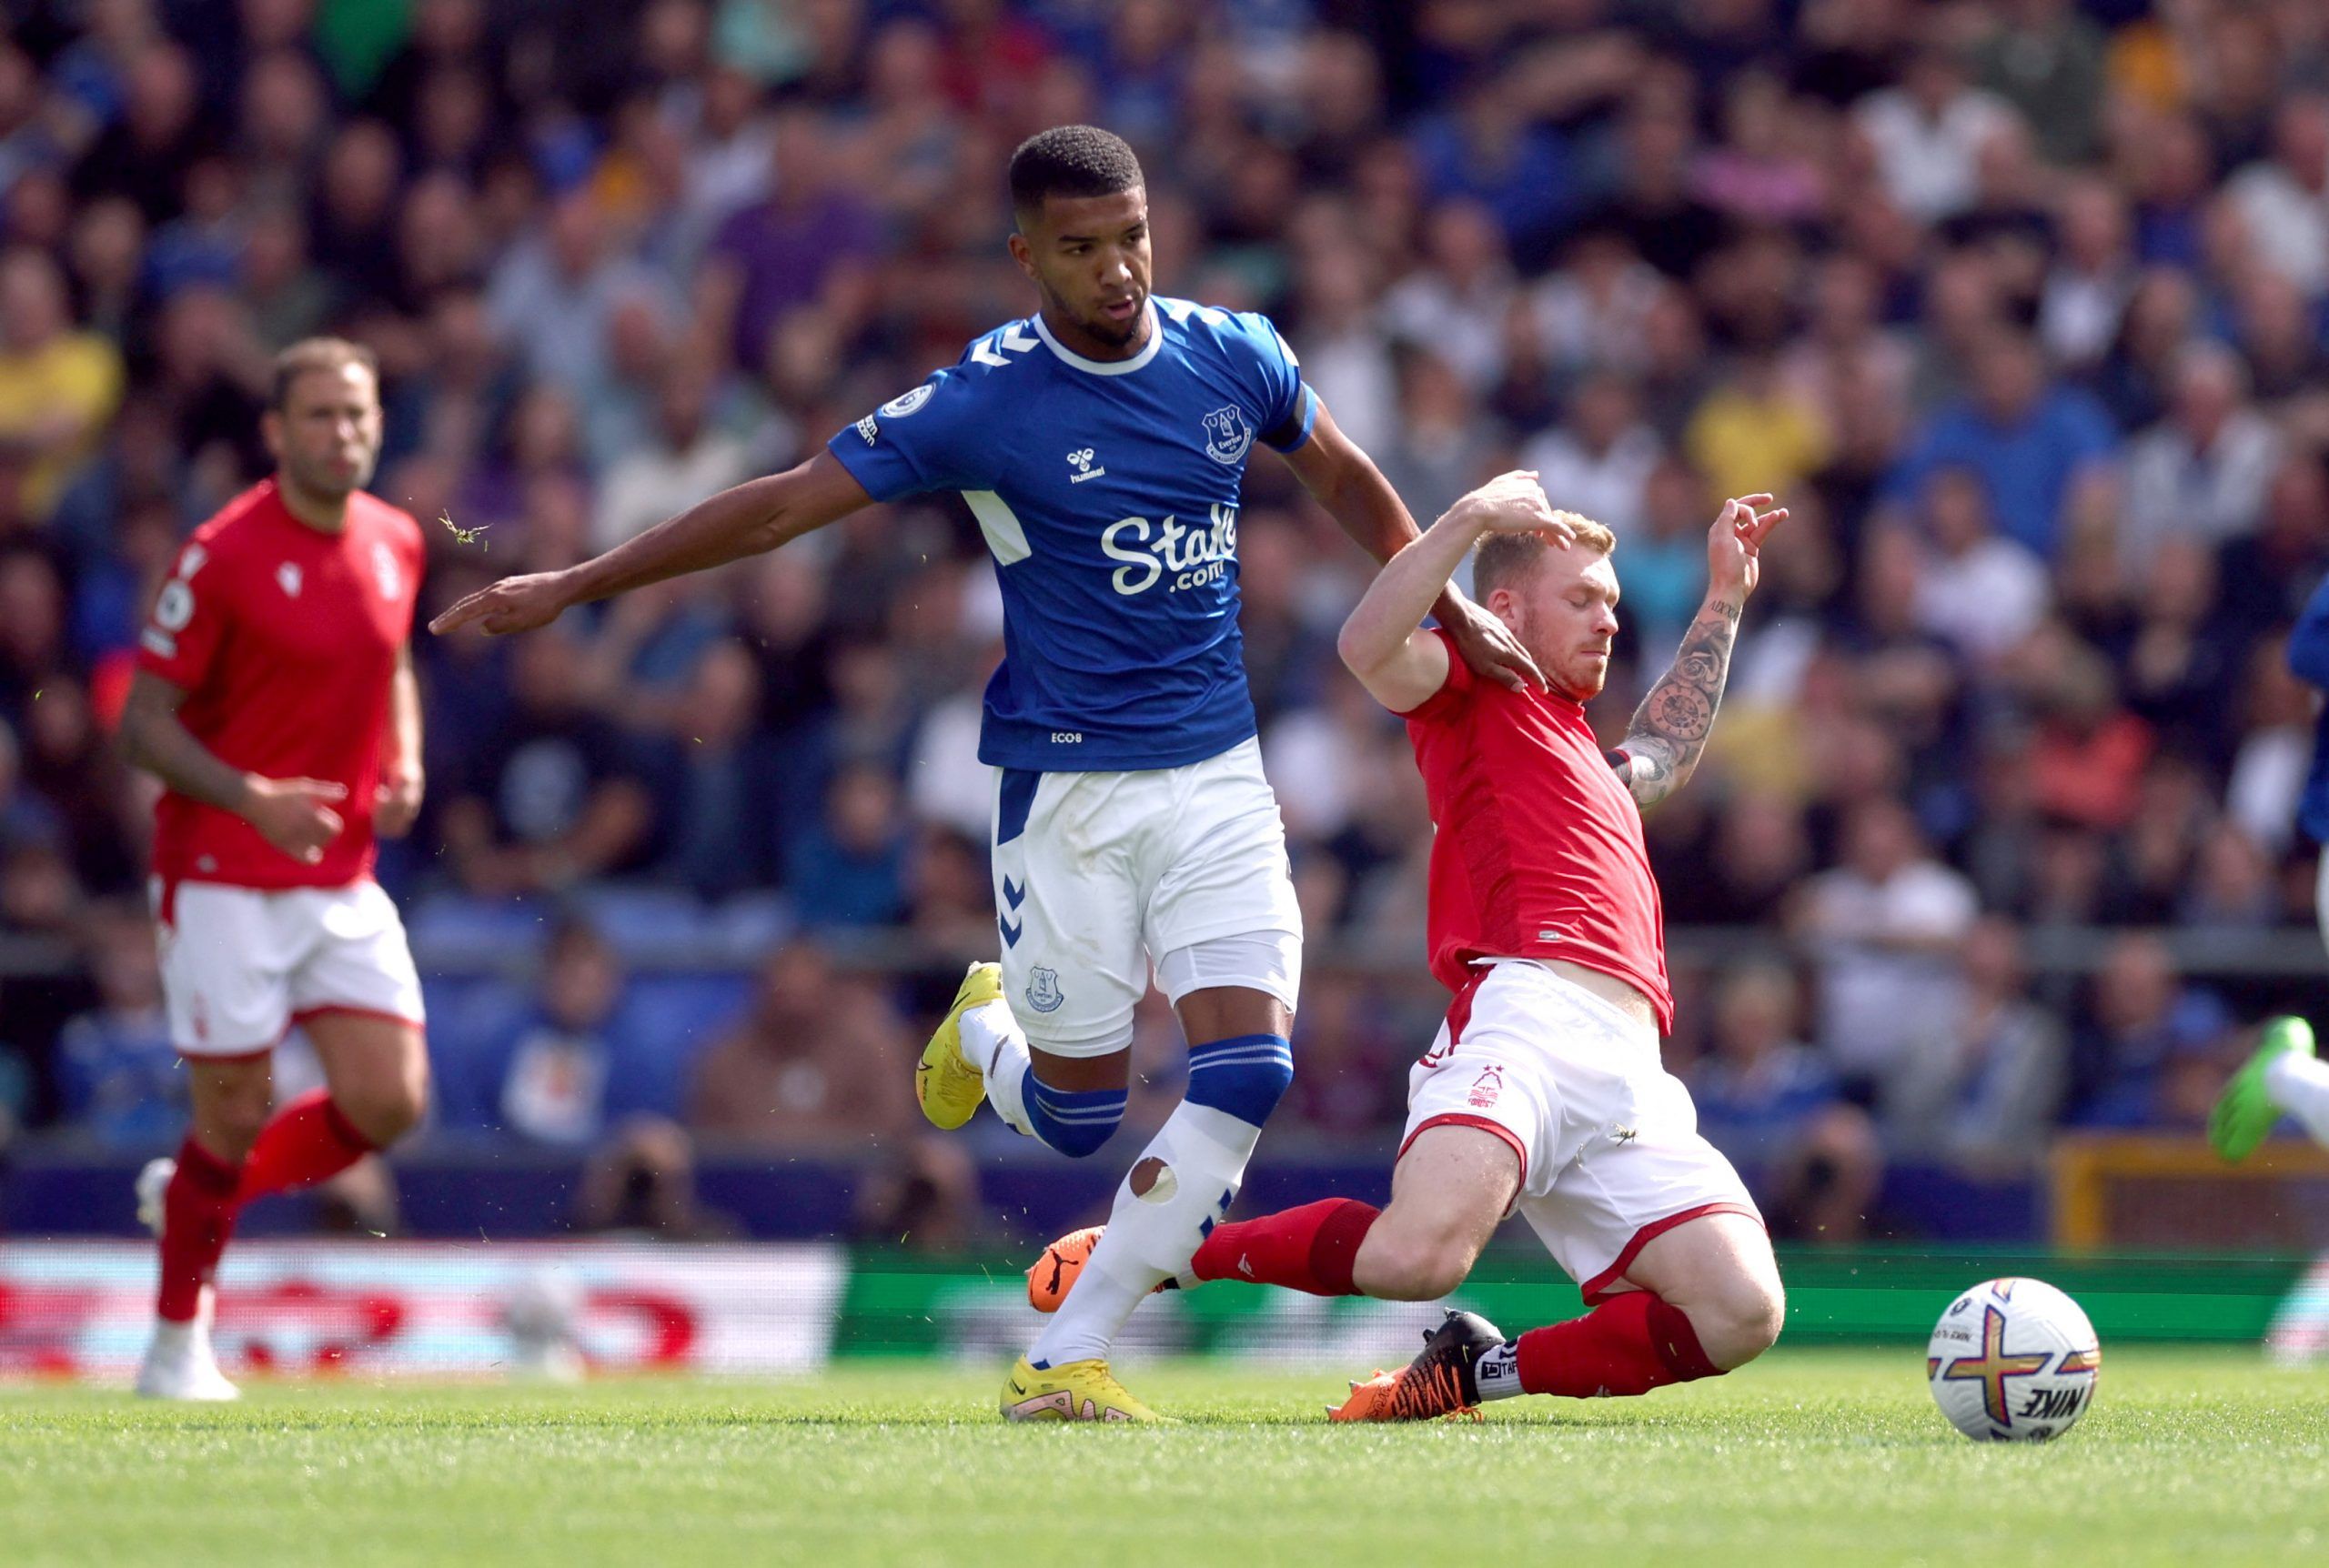 Soccer Football - Premier League - Everton v Nottingham Forest - Goodison Park, Liverpool, Britain - August 20, 2022 Everton's Mason Holgate in action with Nottingham Forest's Lewis O'Brien Action Images via Reuters/Lee Smith EDITORIAL USE ONLY. No use with unauthorized audio, video, data, fixture lists, club/league logos or 'live' services. Online in-match use limited to 75 images, no video emulation. No use in betting, games or single club /league/player publications.  Please contact your acco